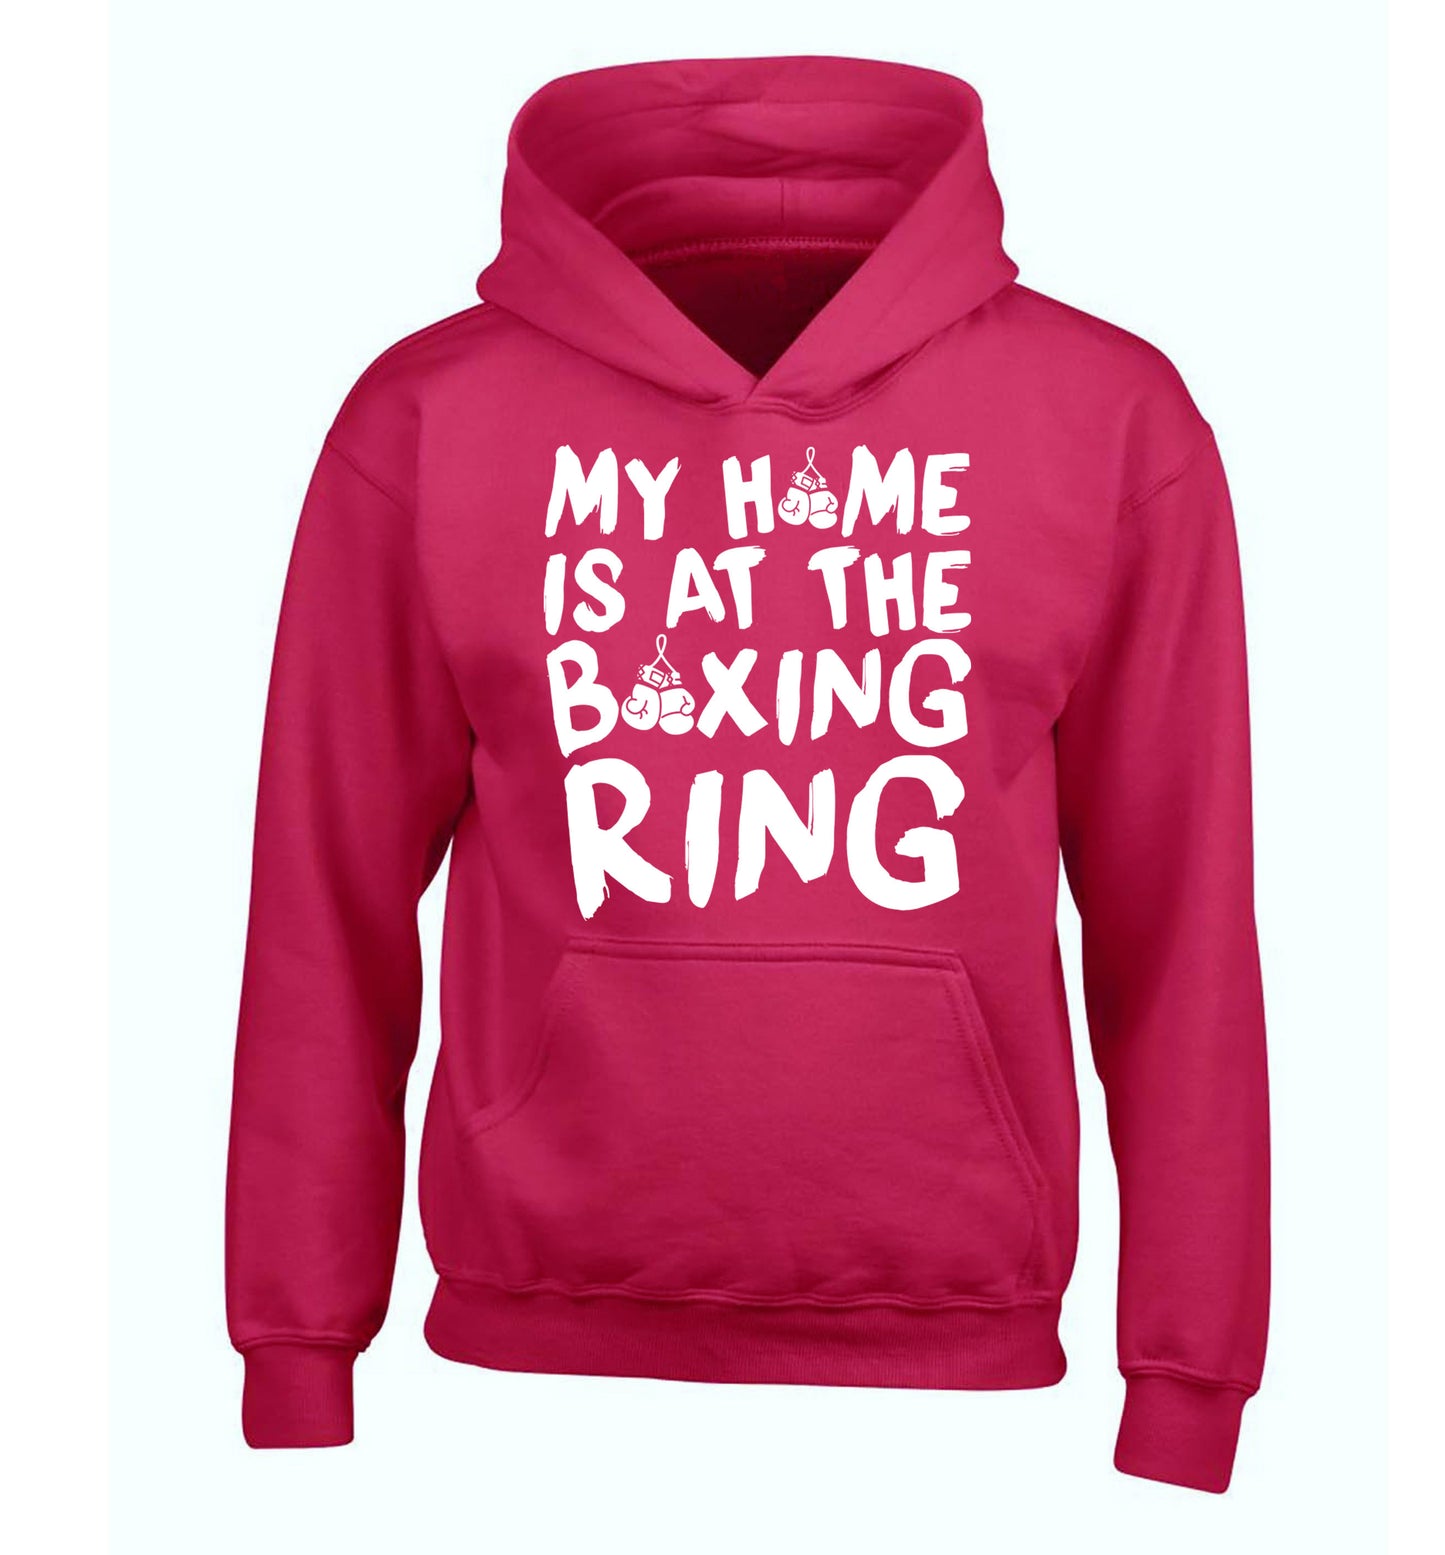 My home is at the boxing ring children's pink hoodie 12-14 Years